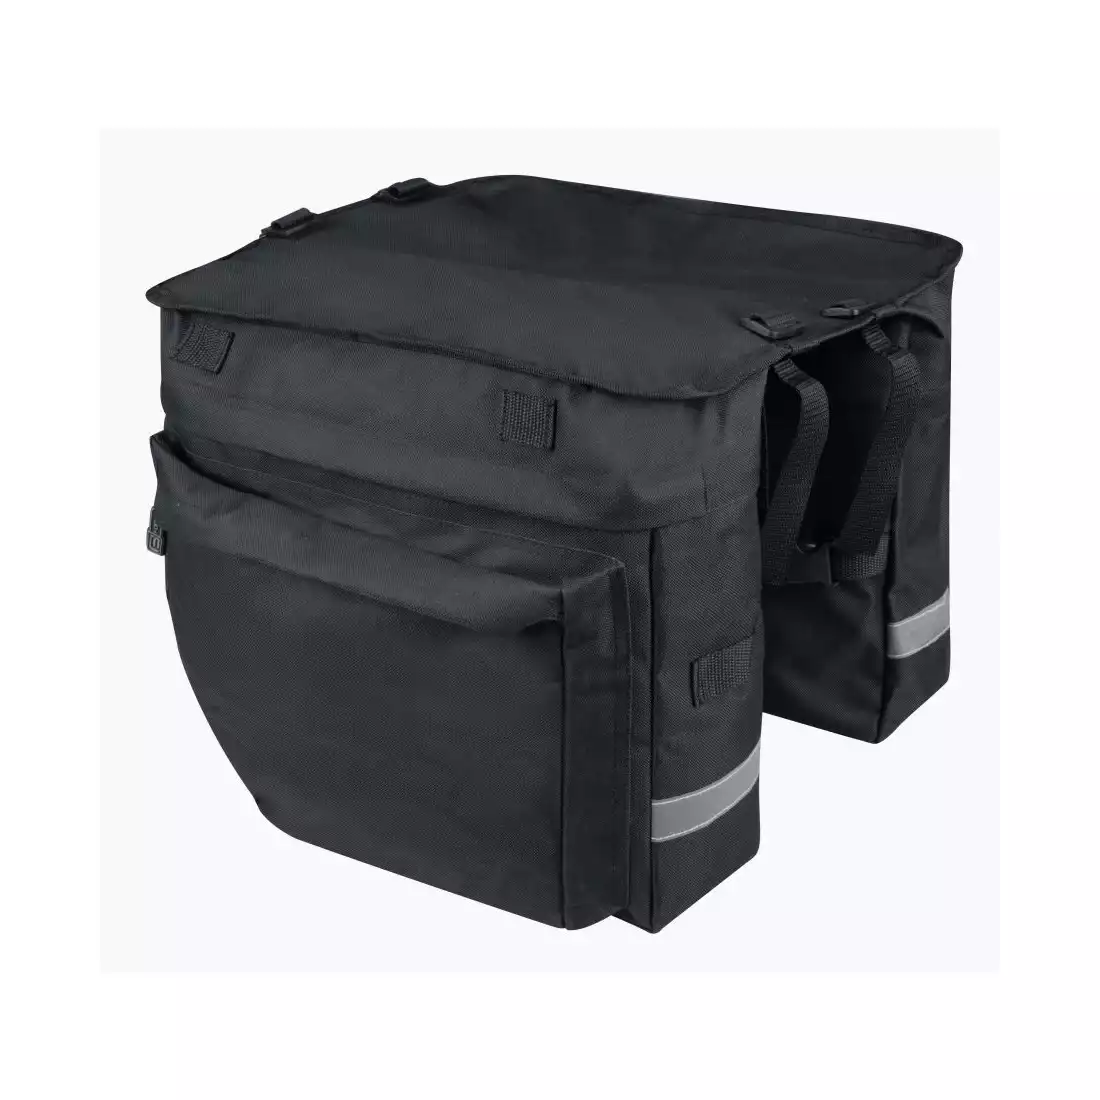 FORCE NOEM BUD bicycle bag for the trunk, black